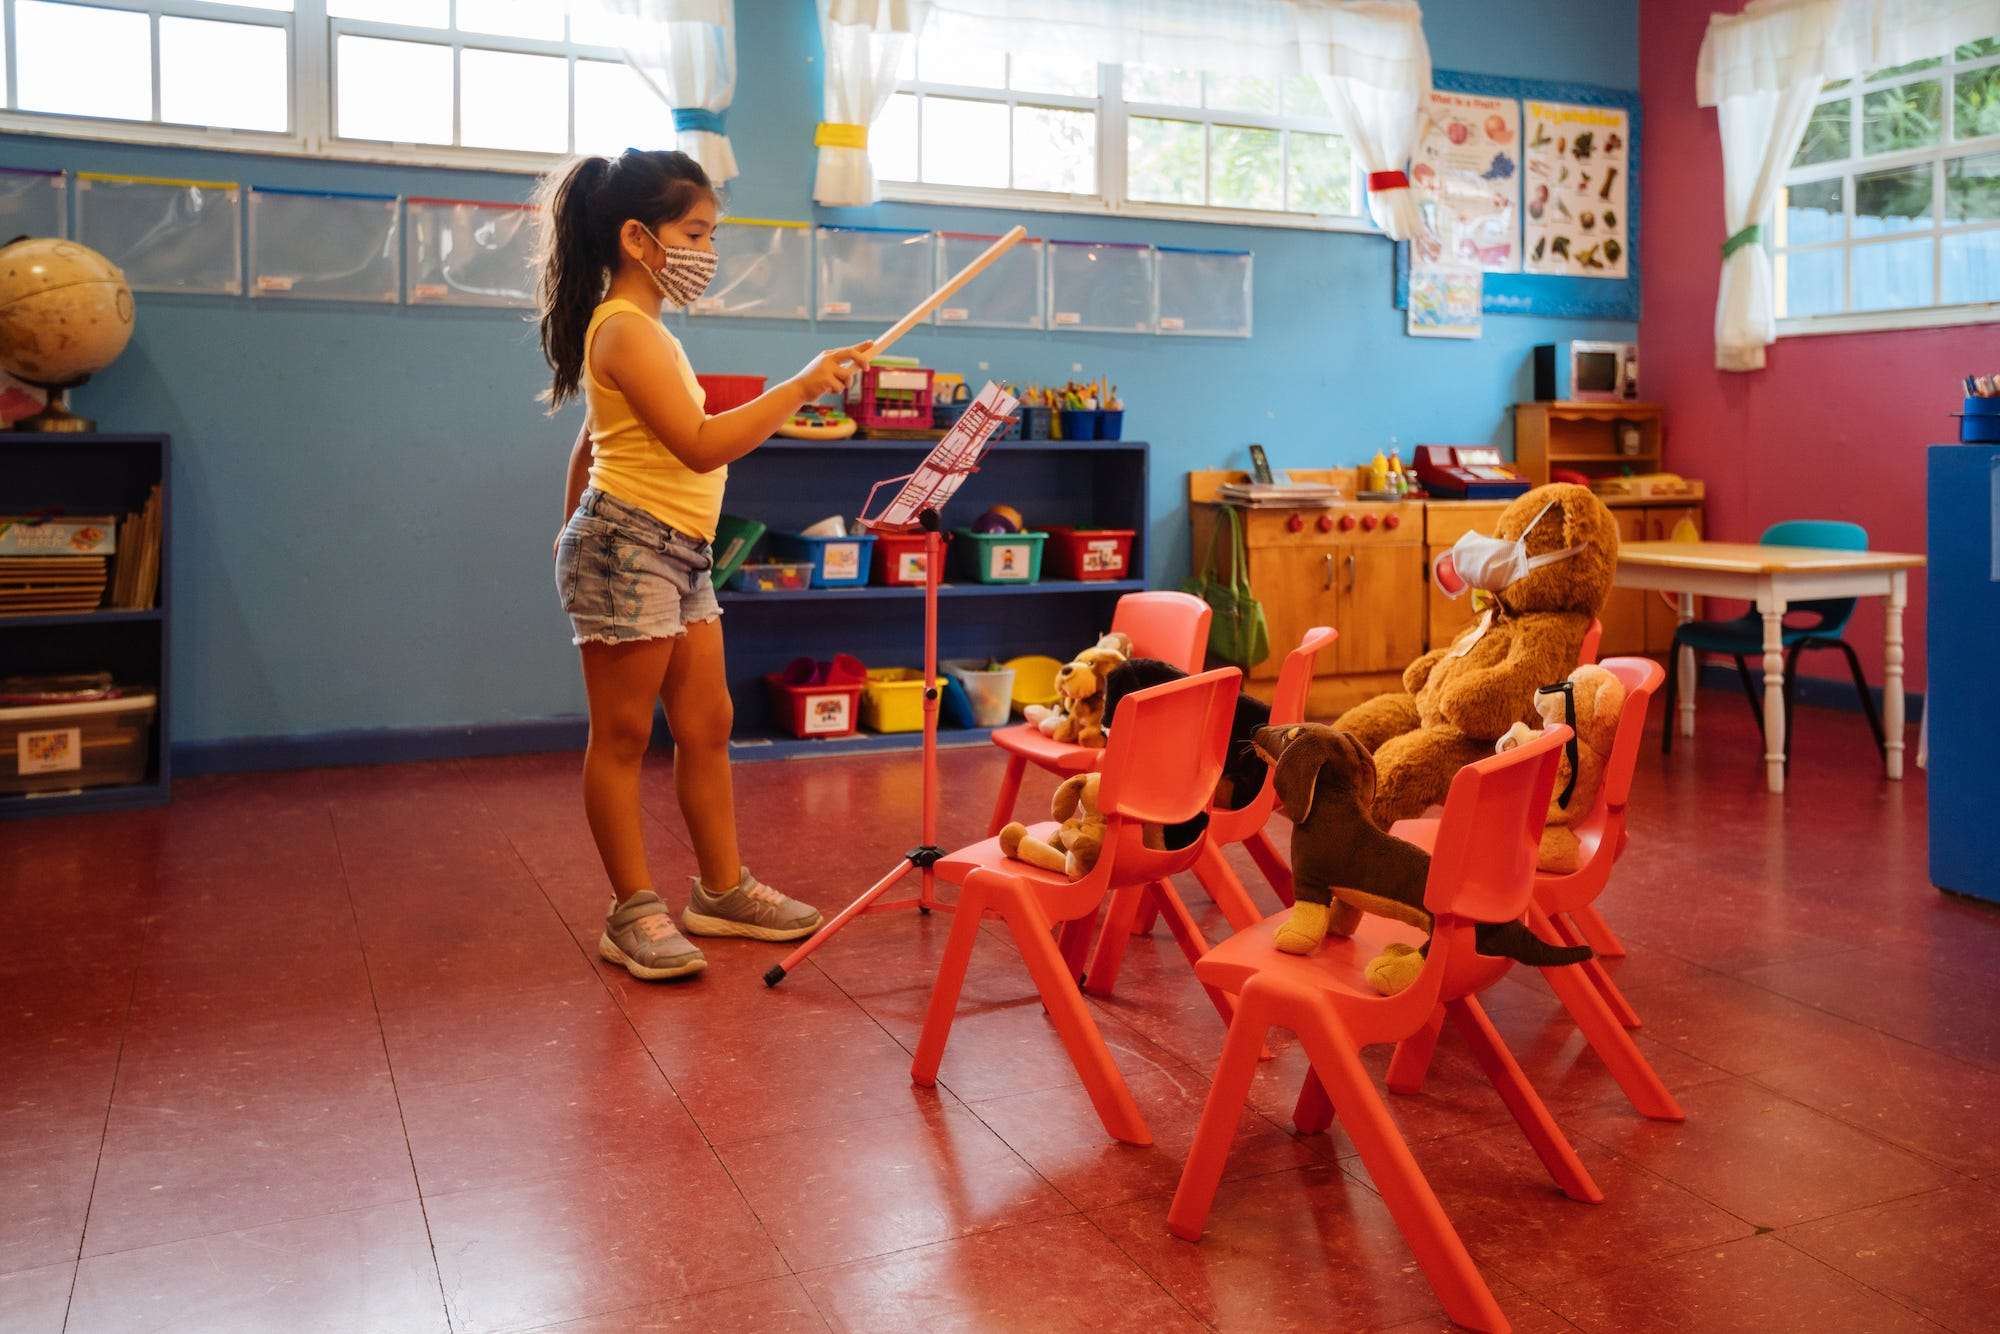 A study of 57,000 childcare providers found no risk of increased COVID-19  spread between kids and adults | Business Insider India